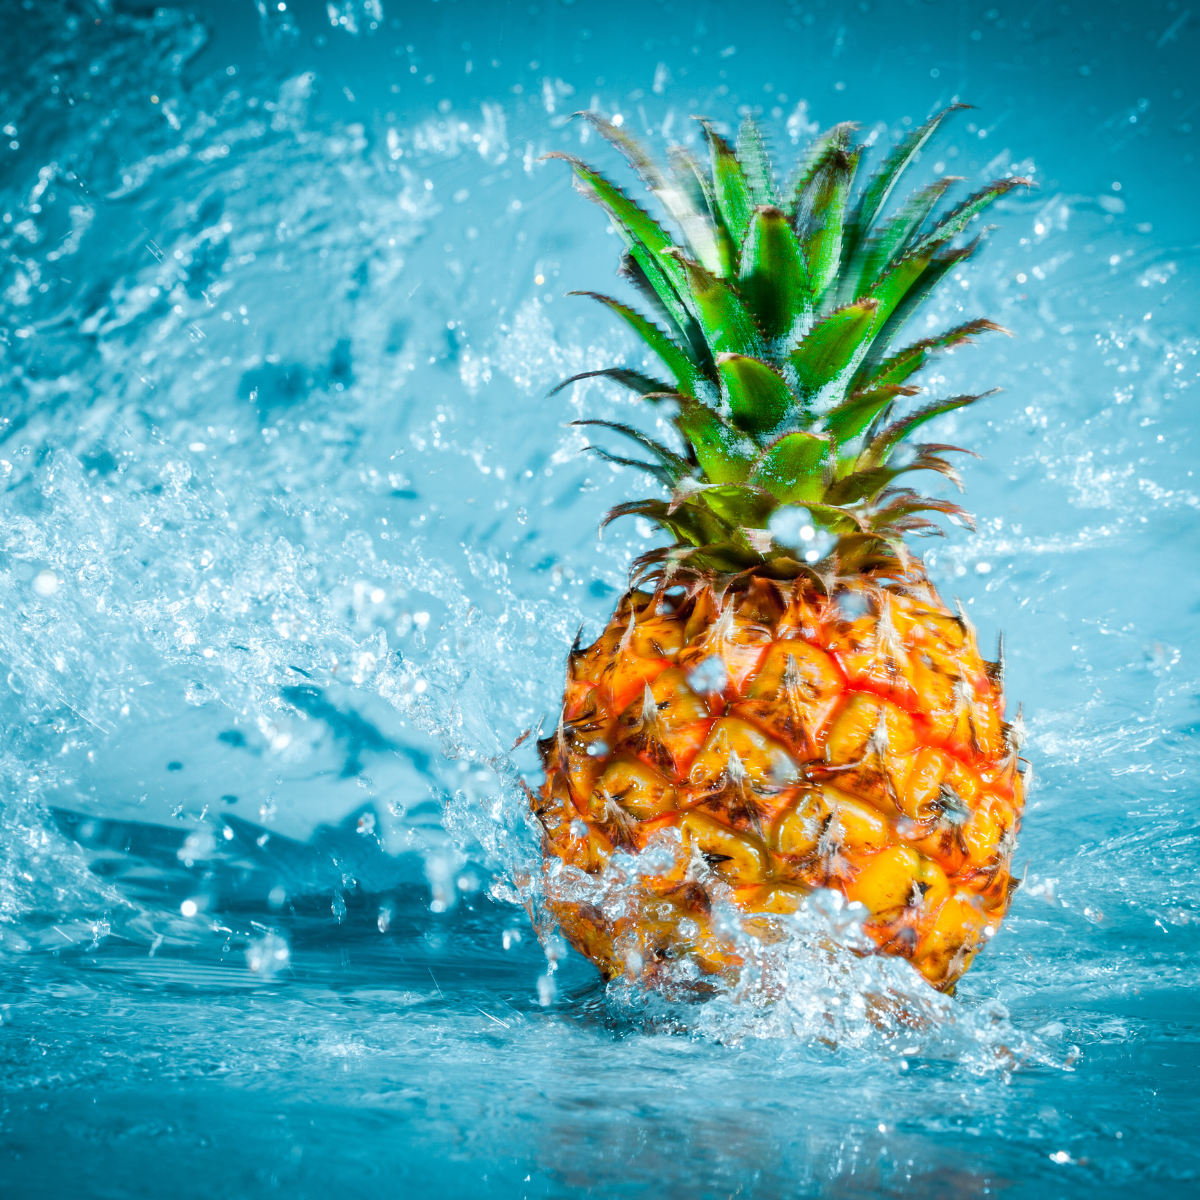 Pineapple in Water: Featured in : Upside Down Pineapple Meaning On Cruise Ships